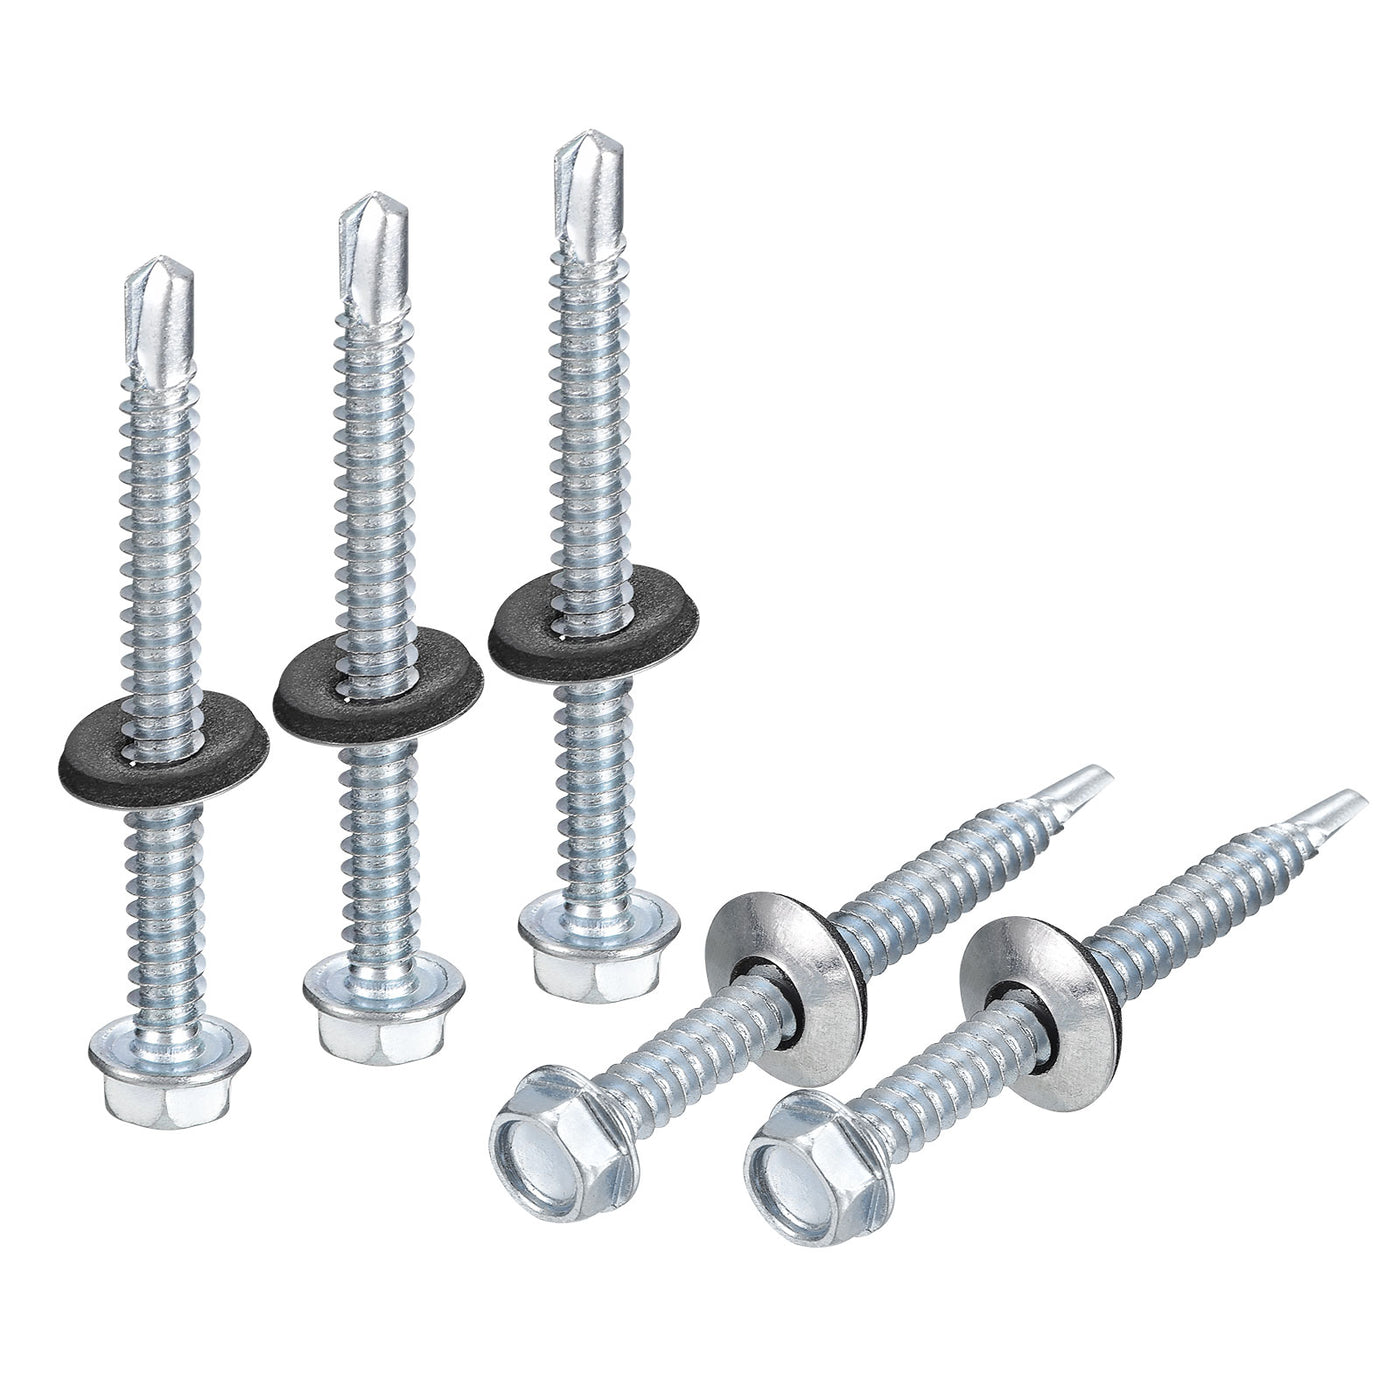 uxcell Uxcell #14 x 2-1/2" Self Drilling Screws, 50pcs Roofing Screws with EPDM Washer